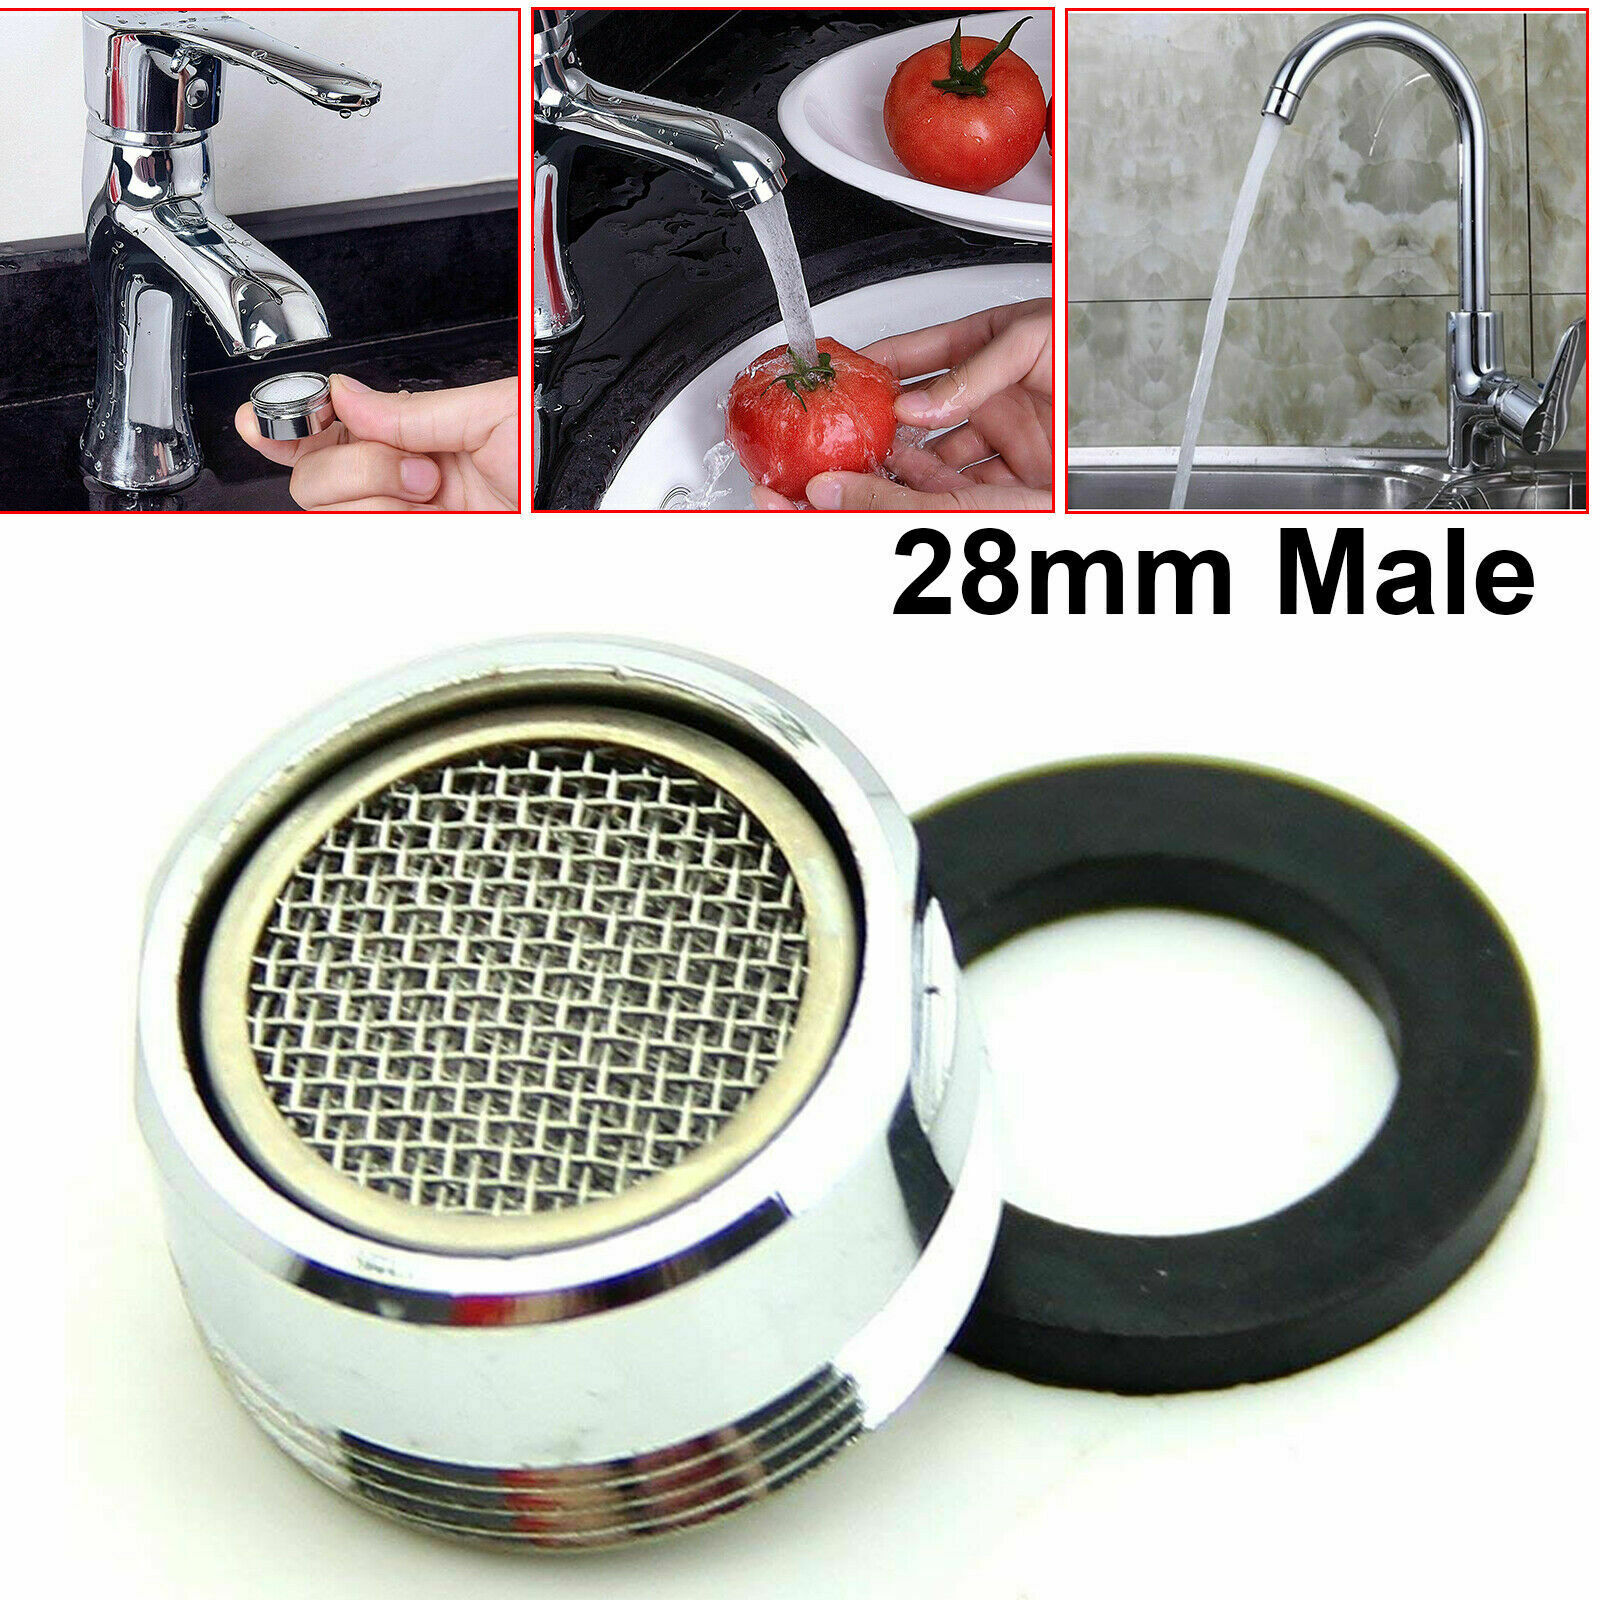 28Mm Male Tap Aerator Water Saving Faucet Nozzle Spout End Diffuser Filter